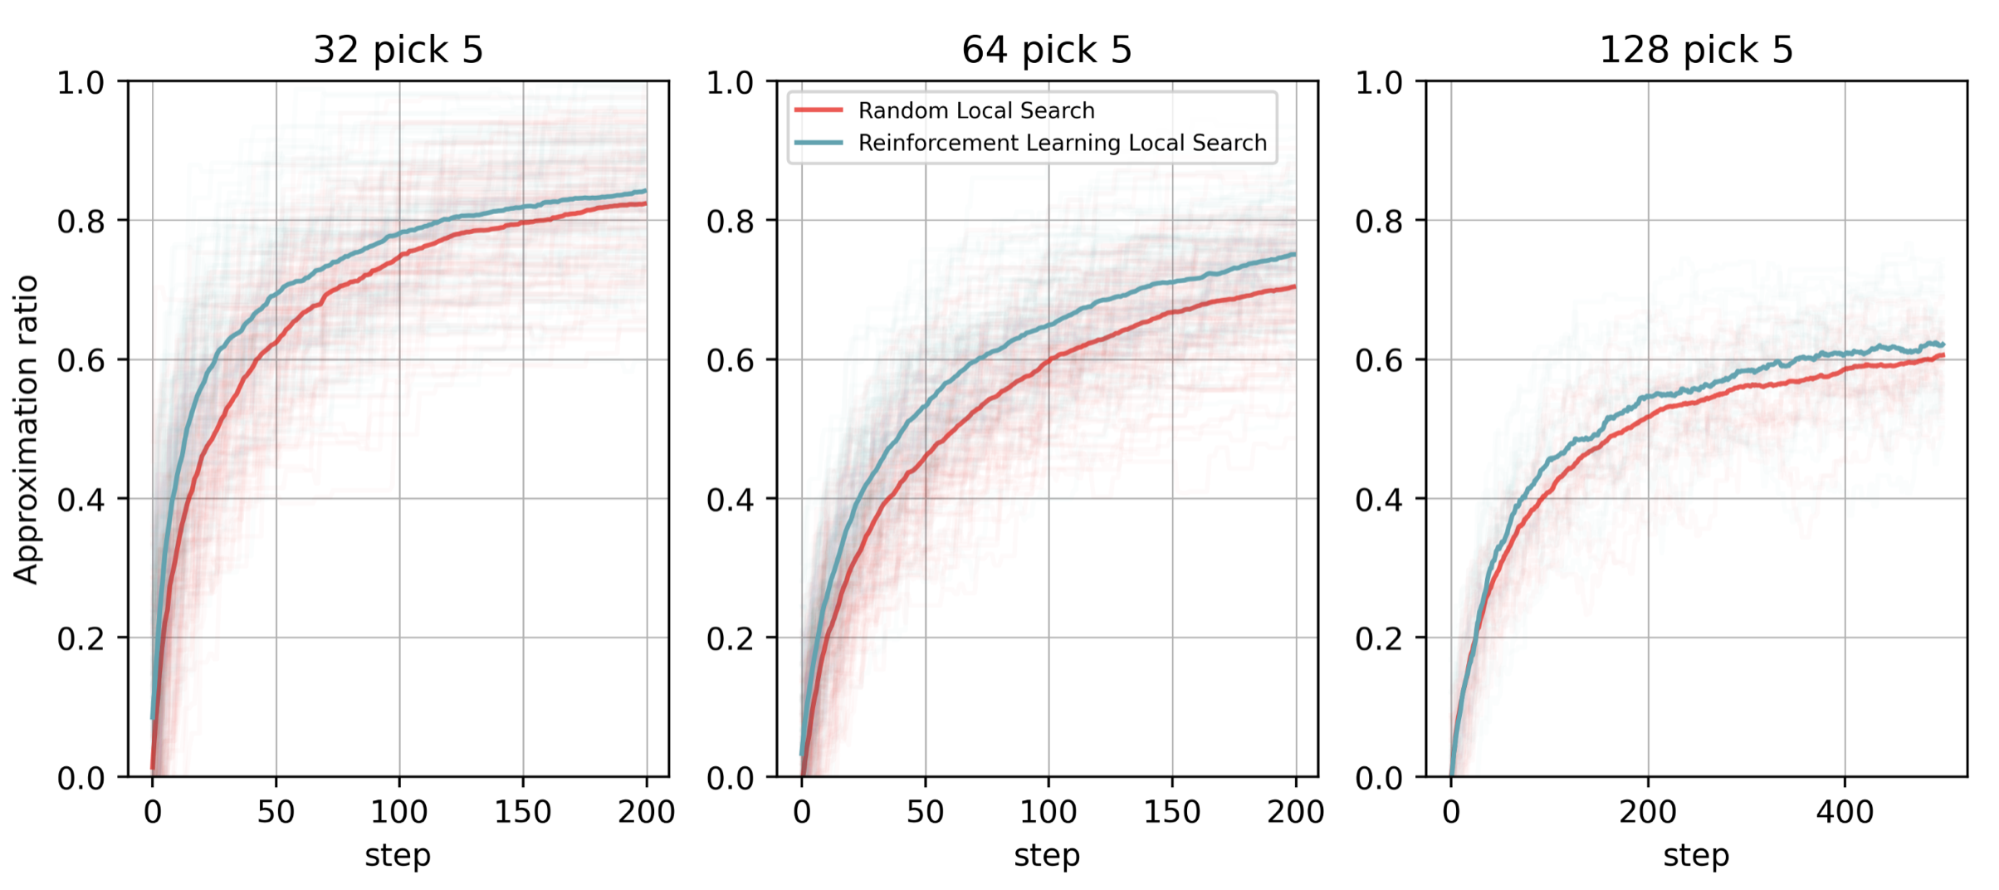 Figure shows three graphs measuring the approximation ratio of each algorithm, reinforcement learning quantum local search and the traditional quantum local search. In all three problem sizes, 32, 64, and 128 variable combinatorial Ising problems with a five-variable solver, the reinforcement learning agent quickly outperforms the quantum local search implementation, showing the value that ML can provide to quantum computing algorithms. 
